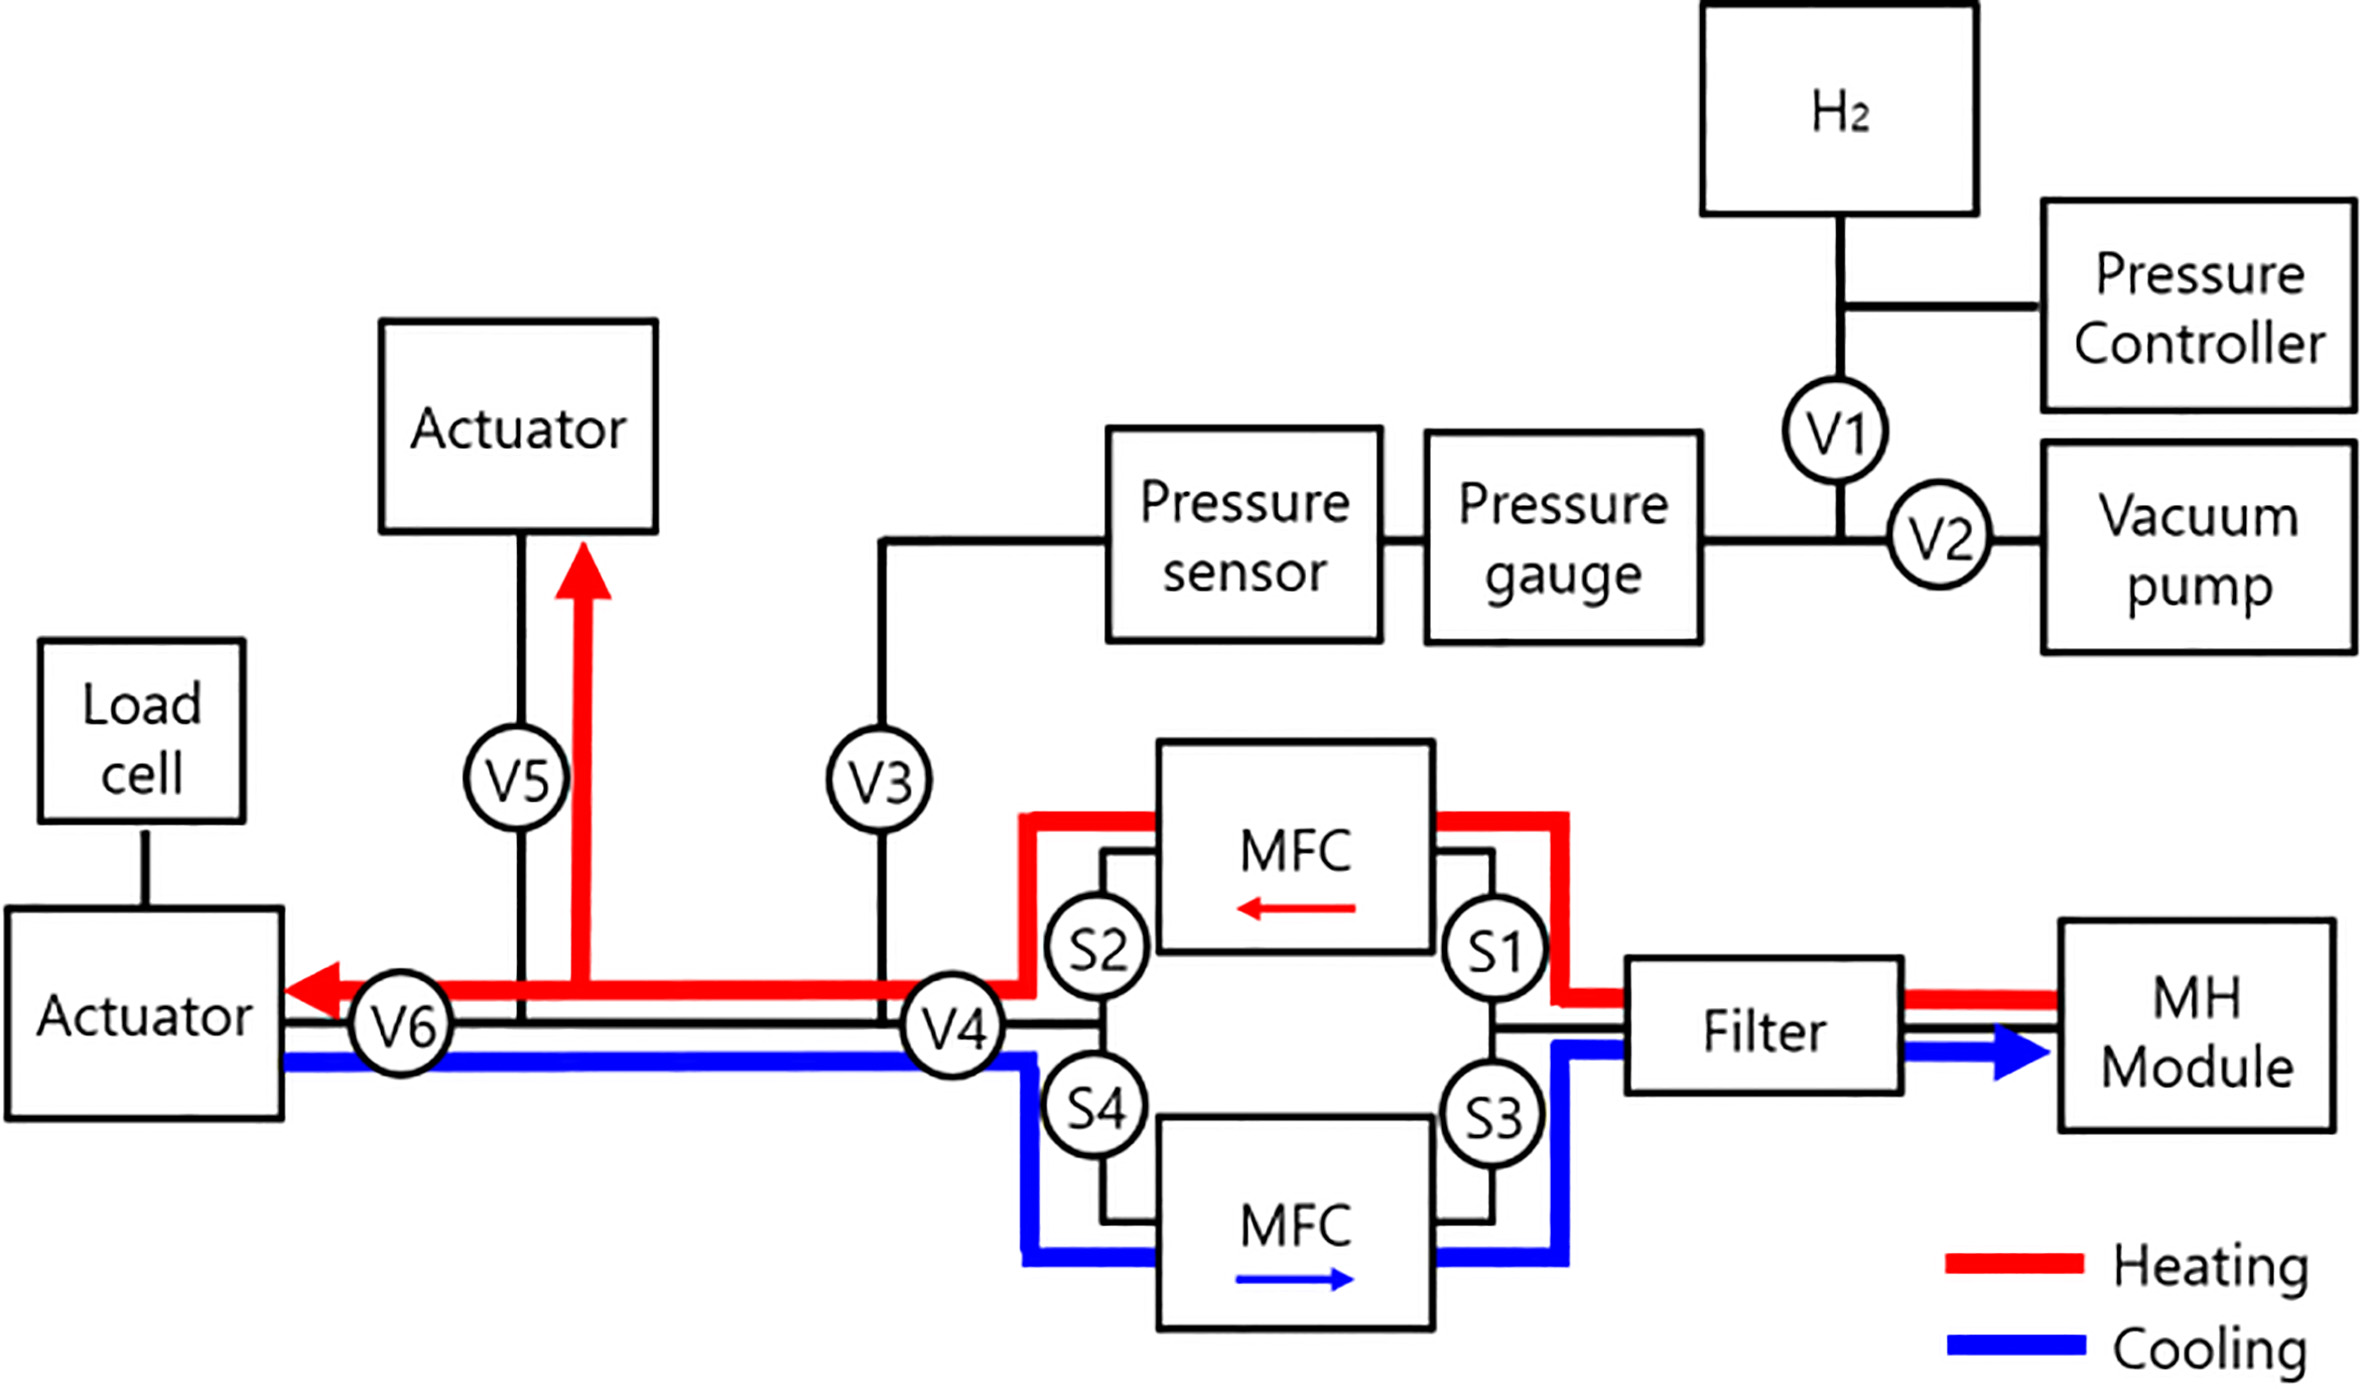 Movement of hydrogen by heating and cooling the metal hydride module.